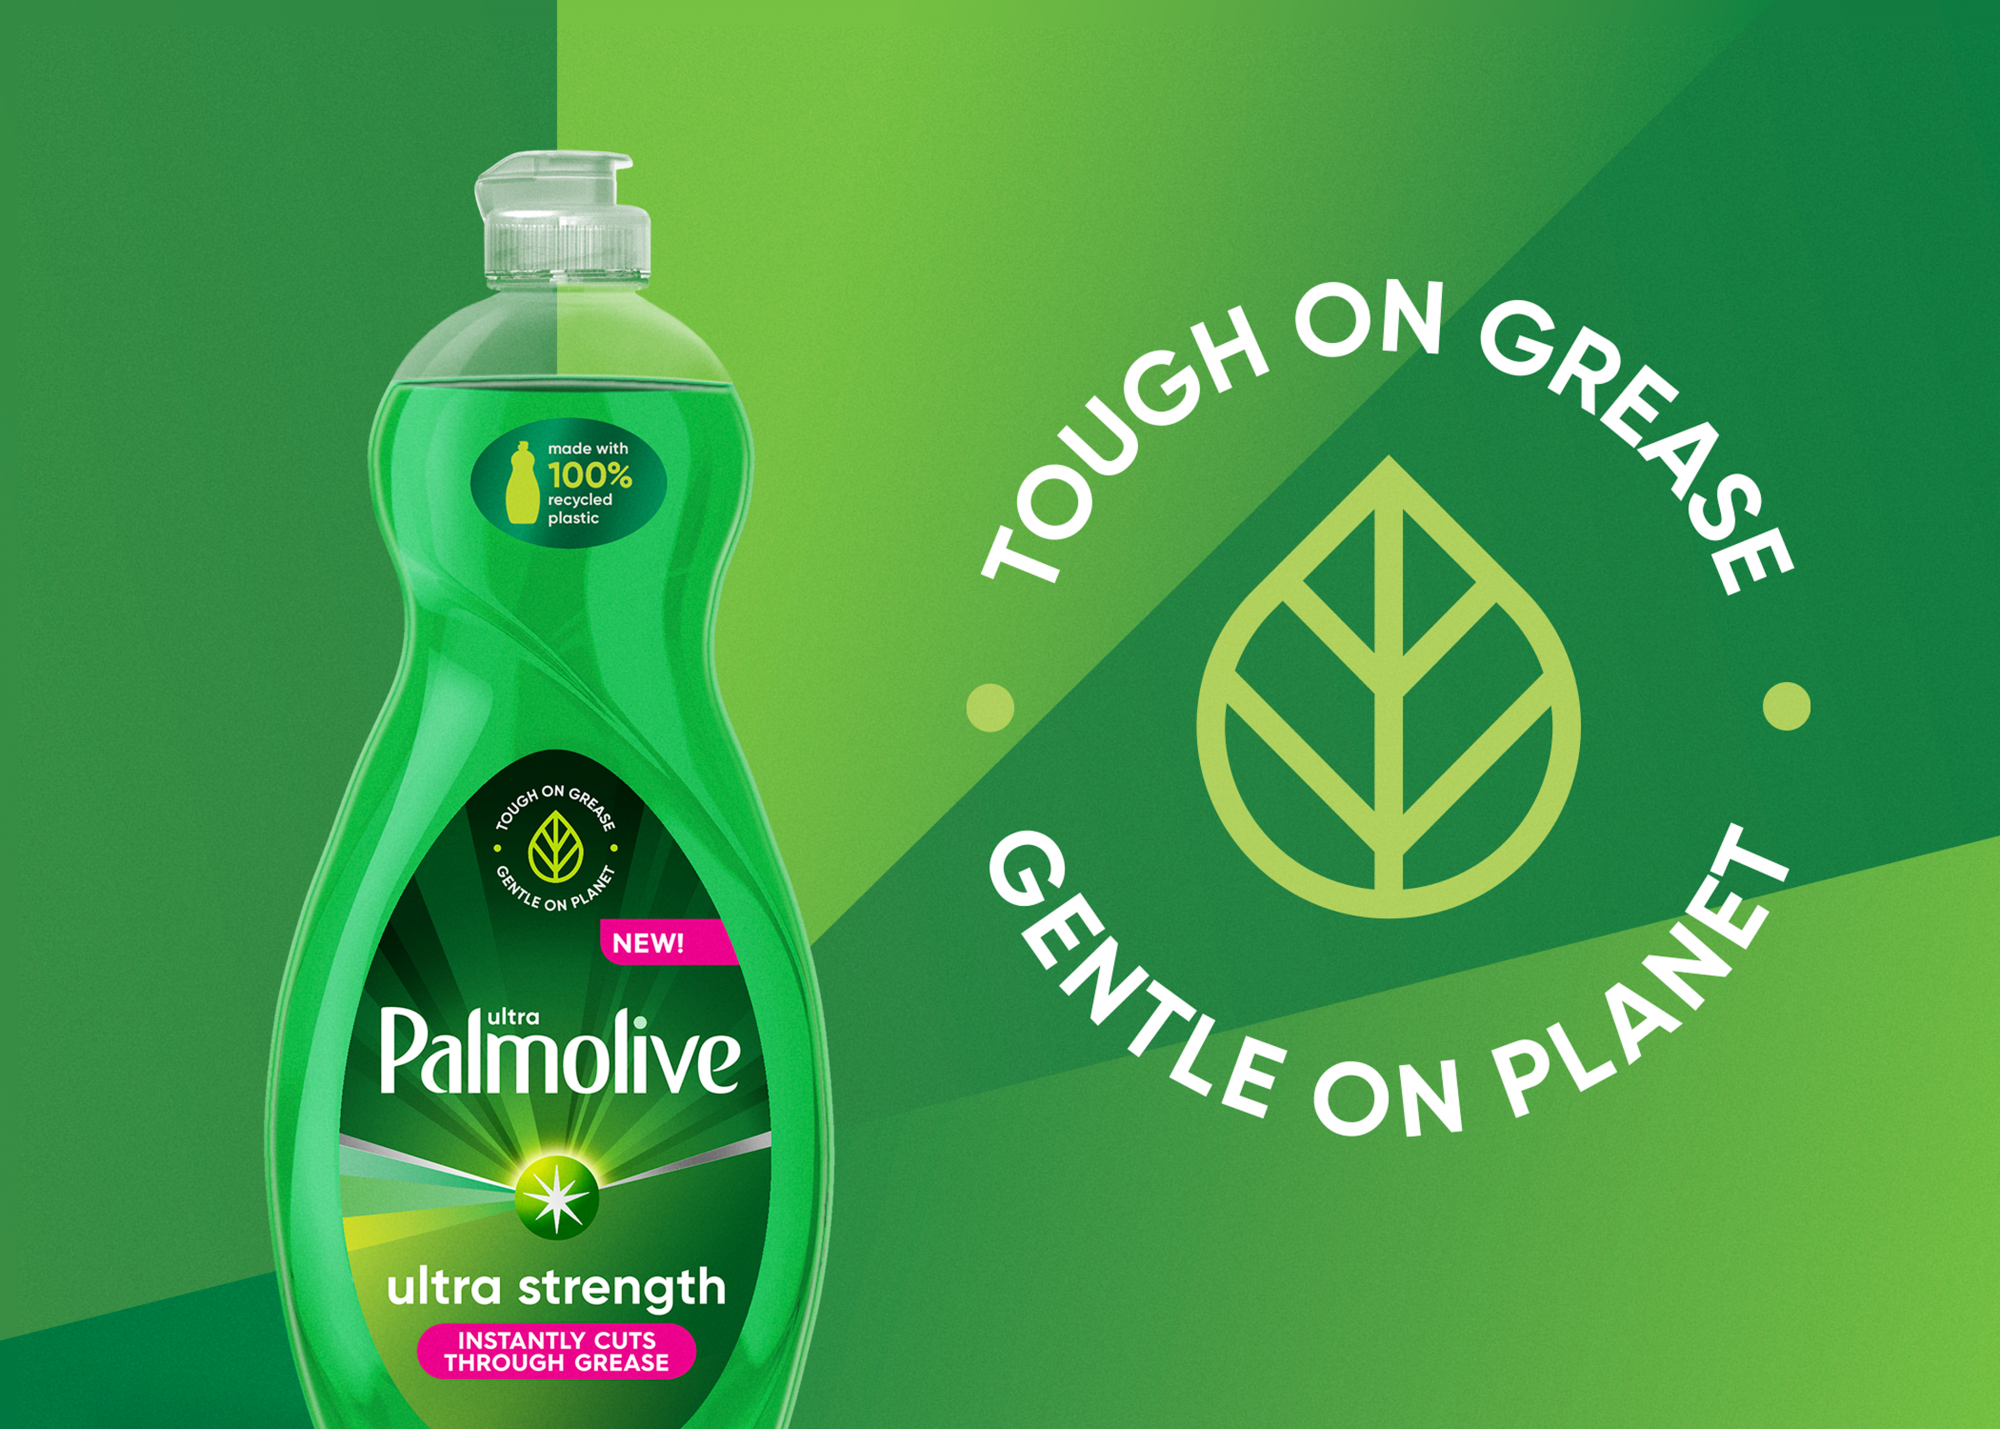 Designing A Cleaner Future With Palmolive